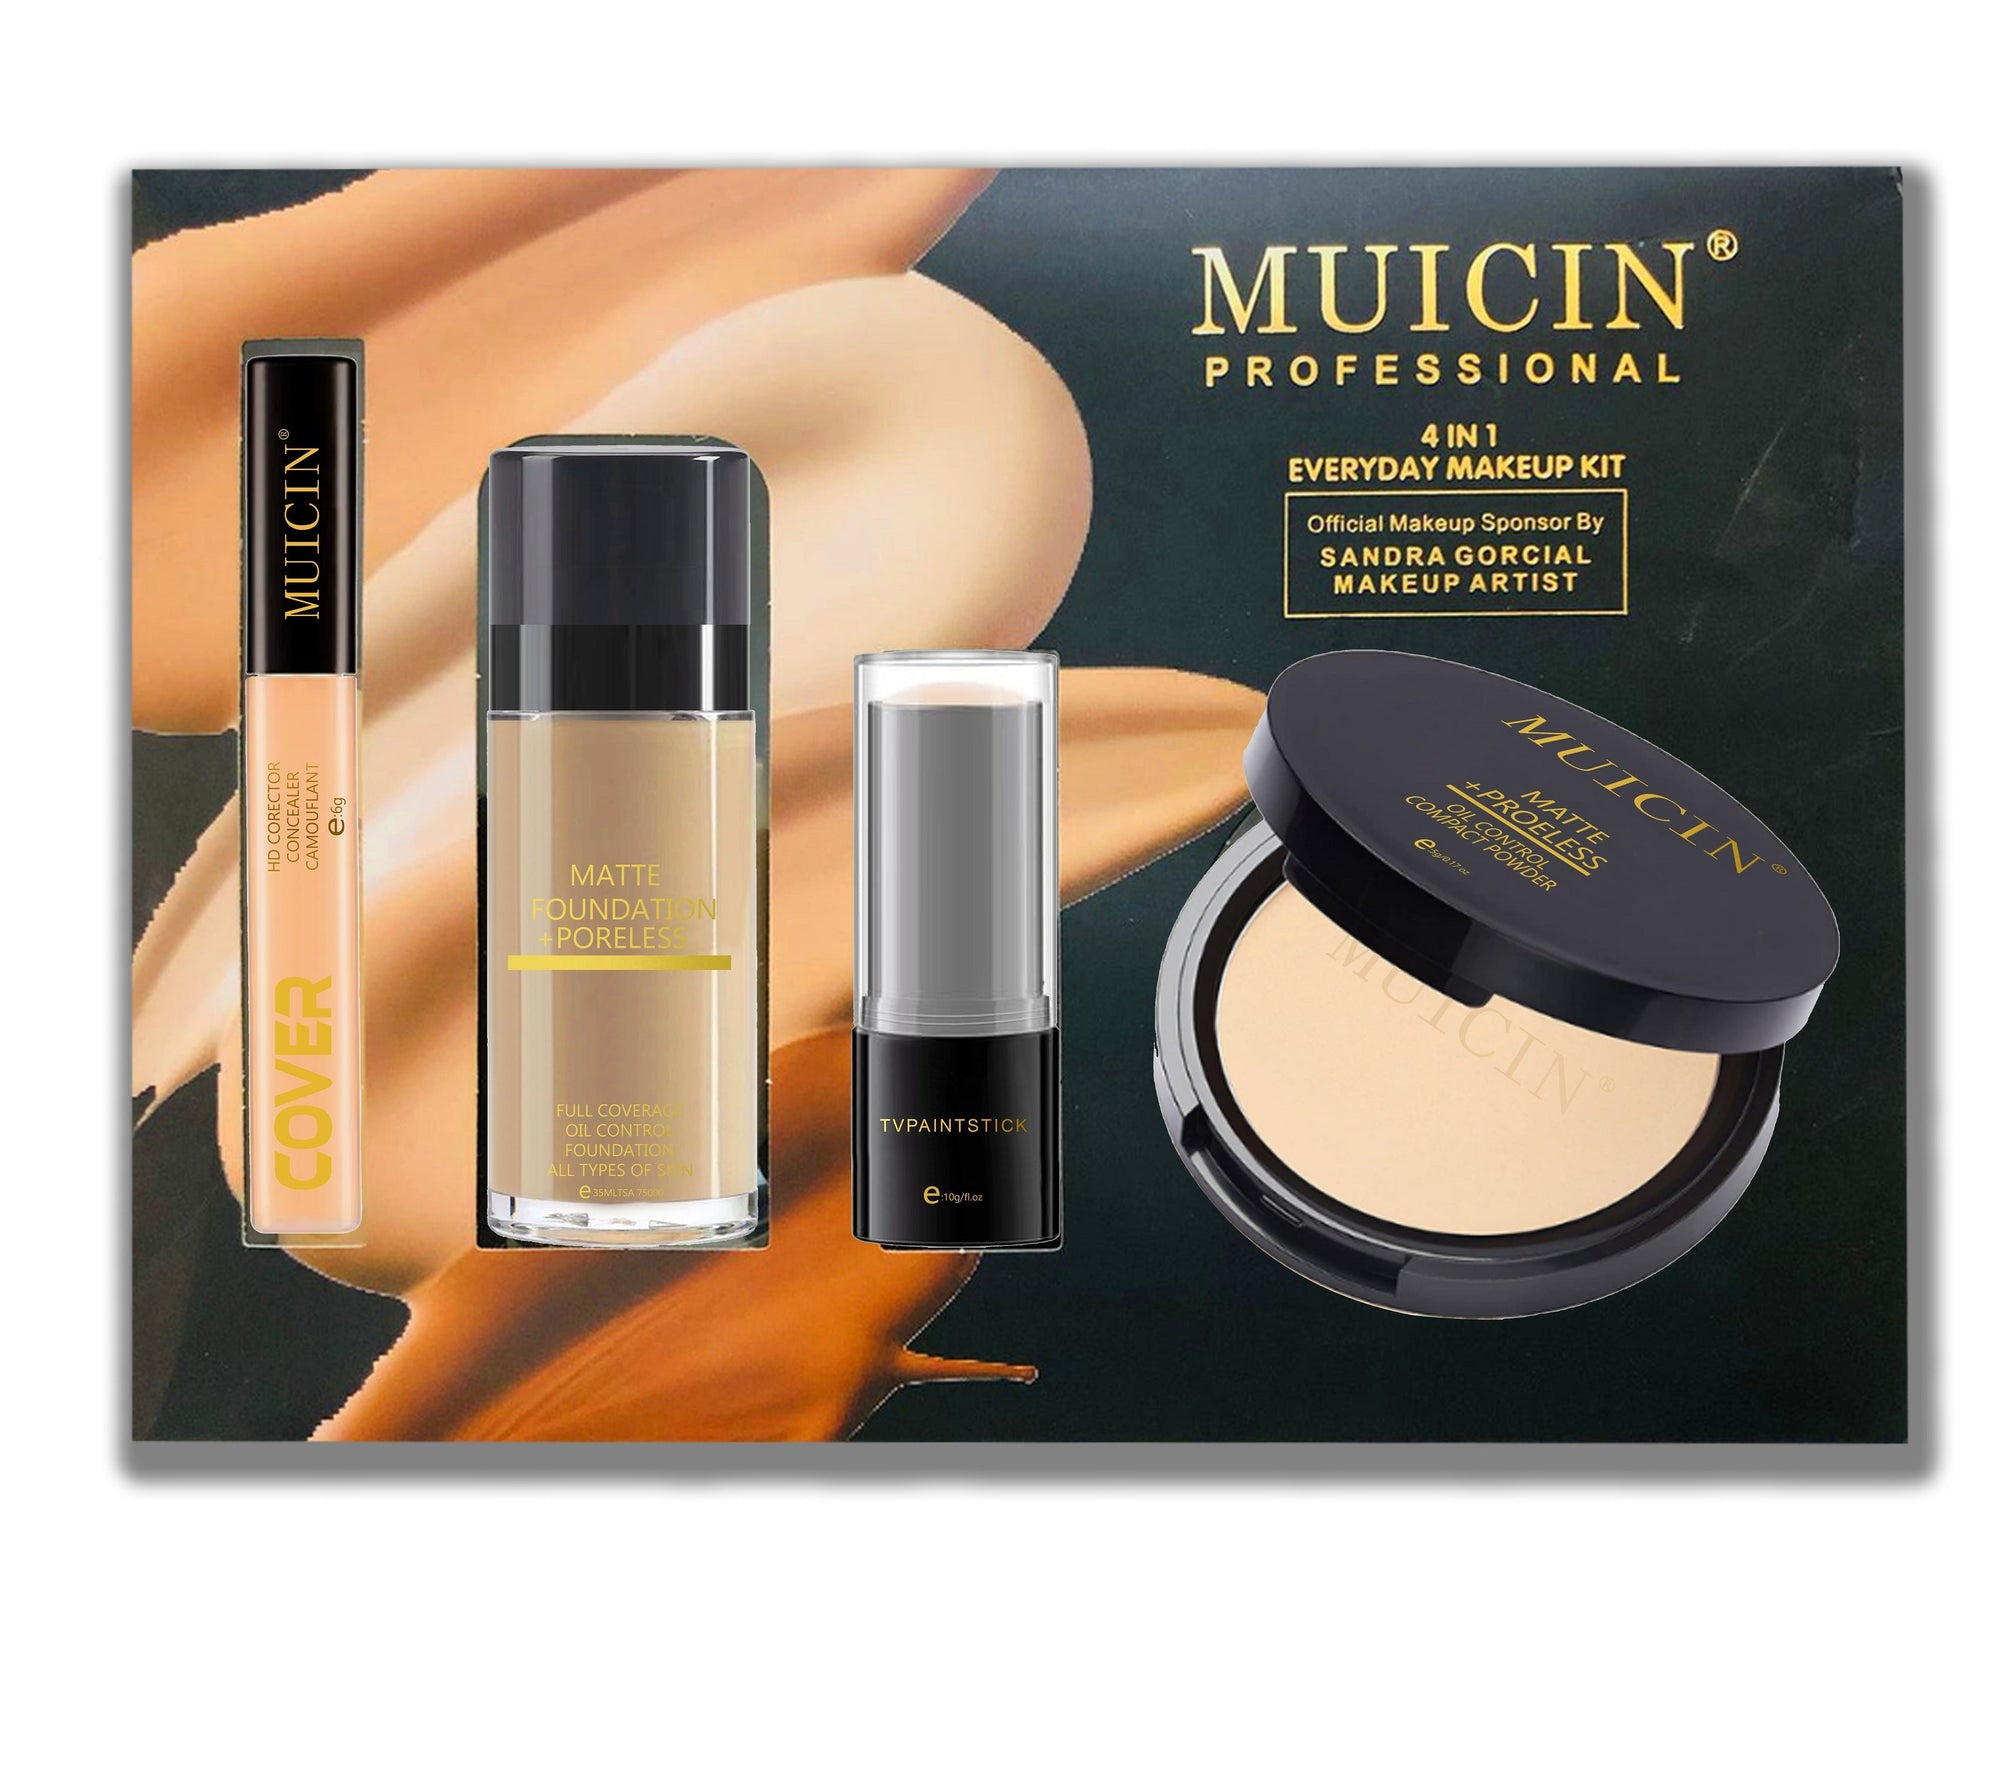 Buy  MUICIN - 4 in 1 Everyday Professional Makeup Kit - Fair at Best Price Online in Pakistan